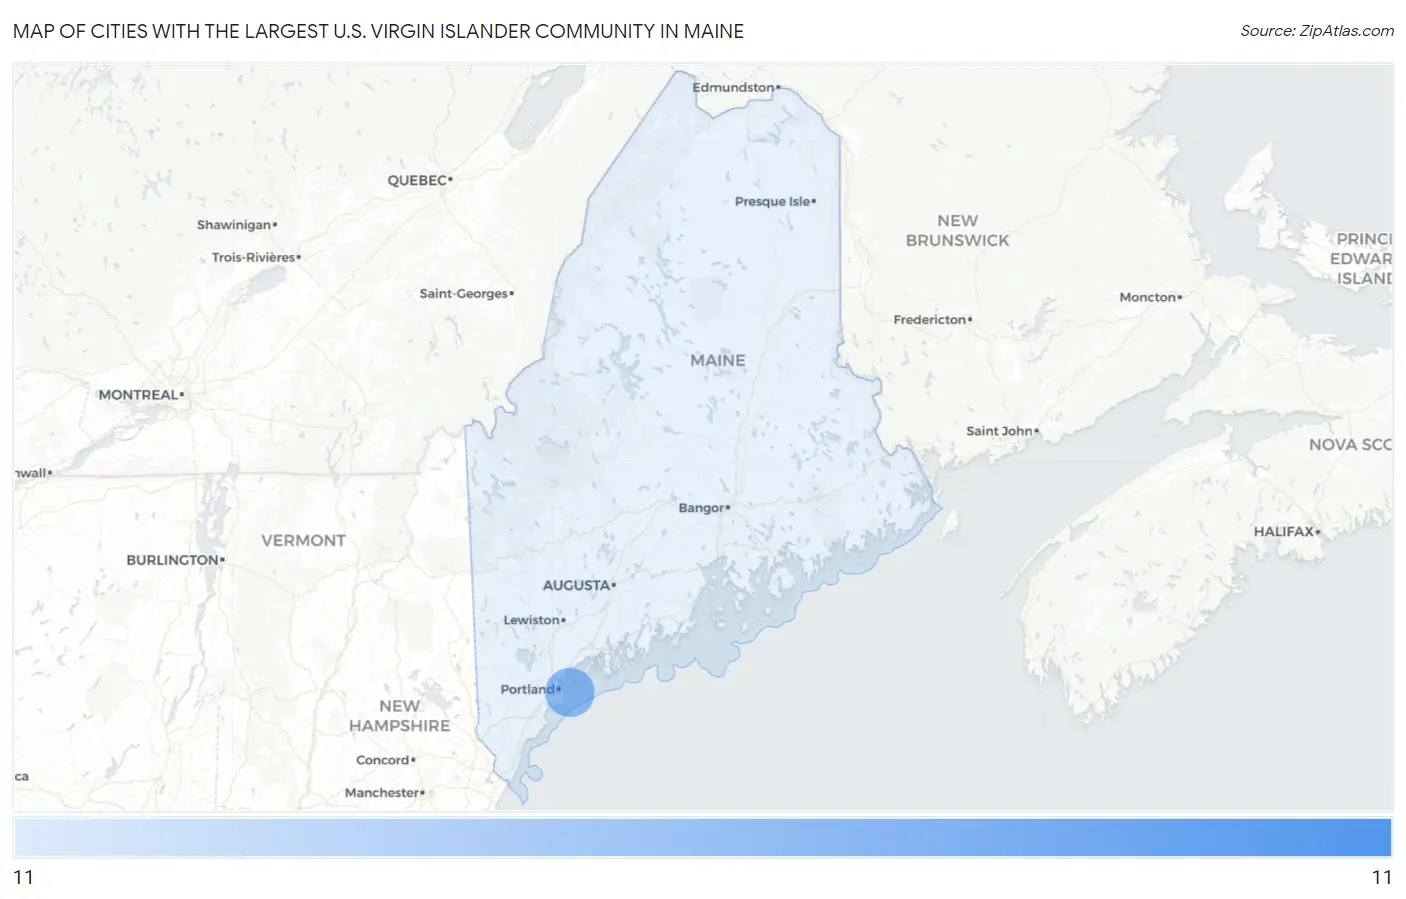 Cities with the Largest U.S. Virgin Islander Community in Maine Map